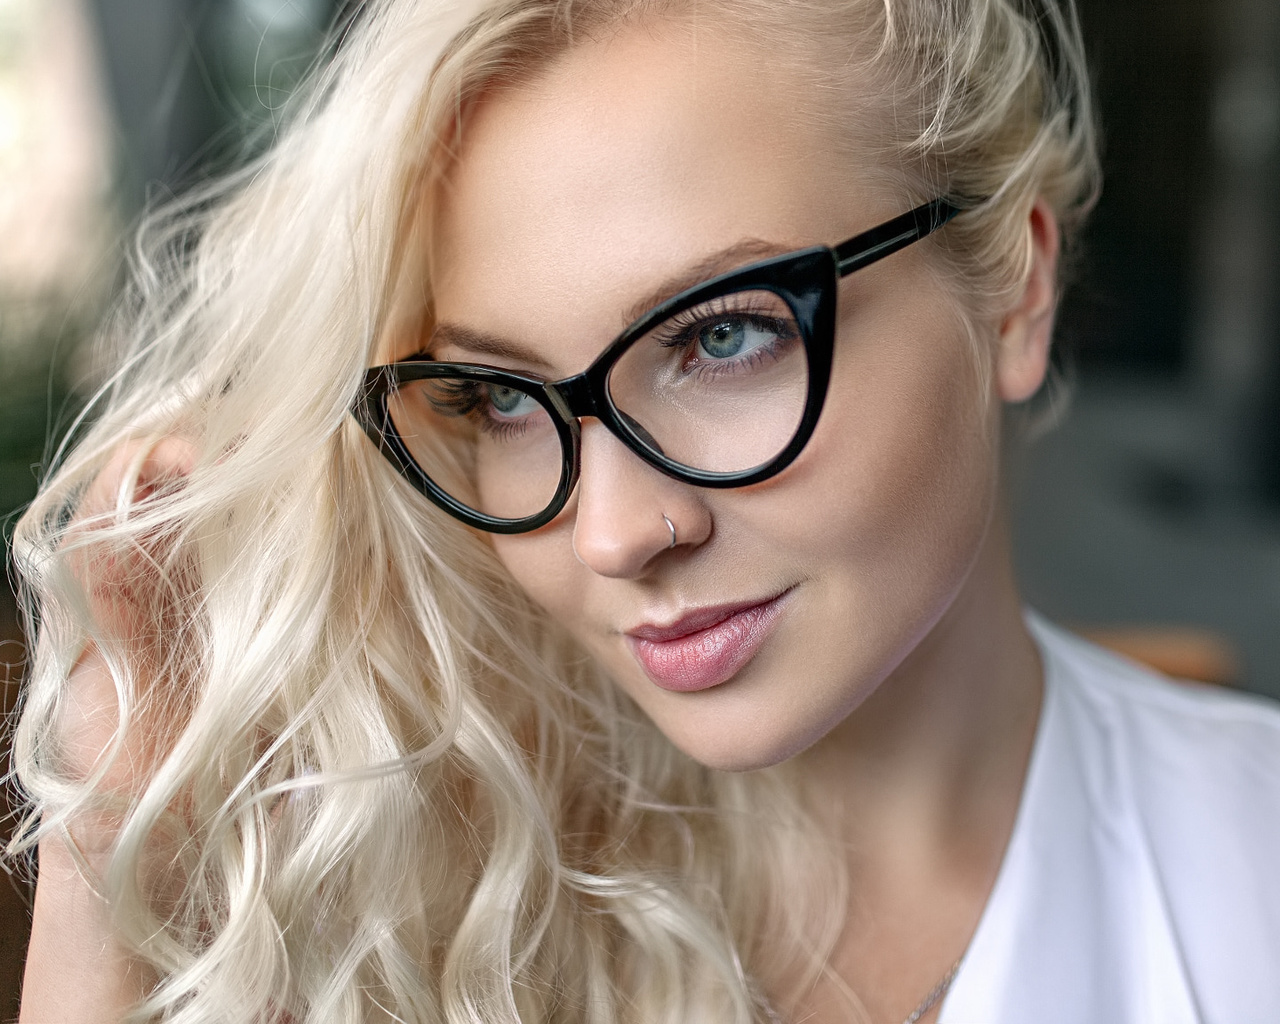 women, blonde, looking away, nose rings, bokeh, women with glasses, 500px